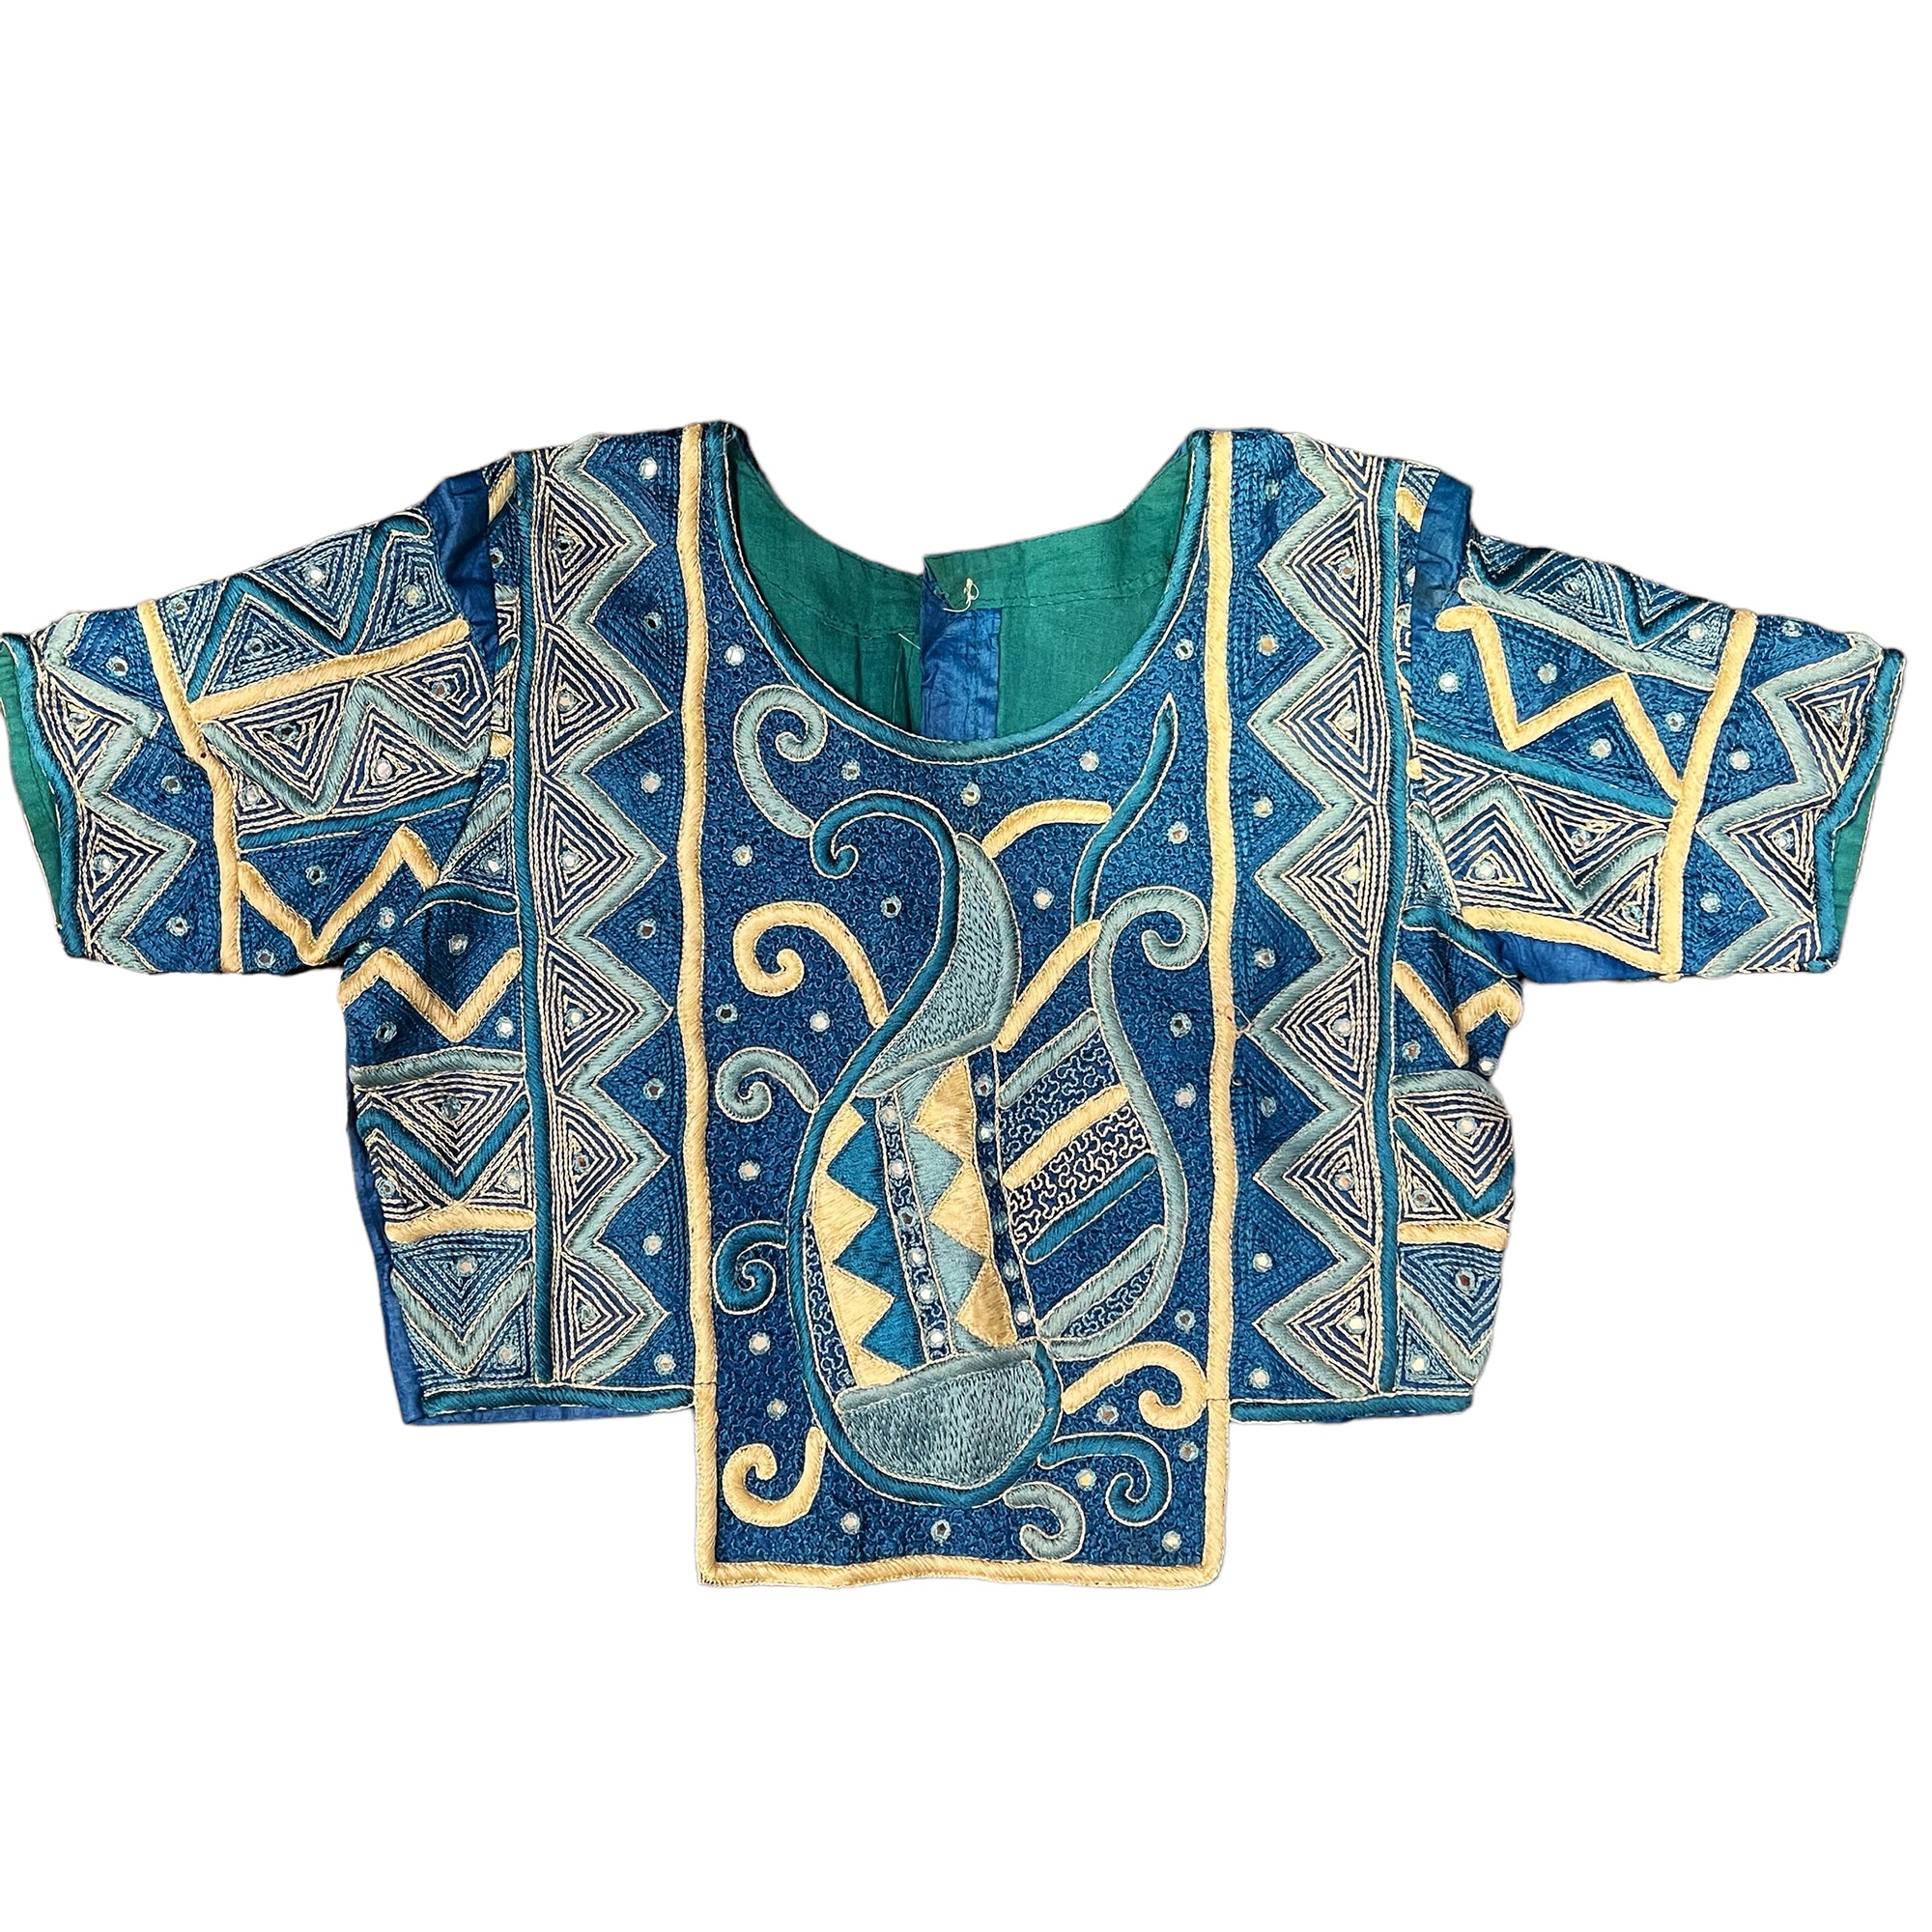 Ocean Blue Embroidered Choli Blouse - Vintage India NYC